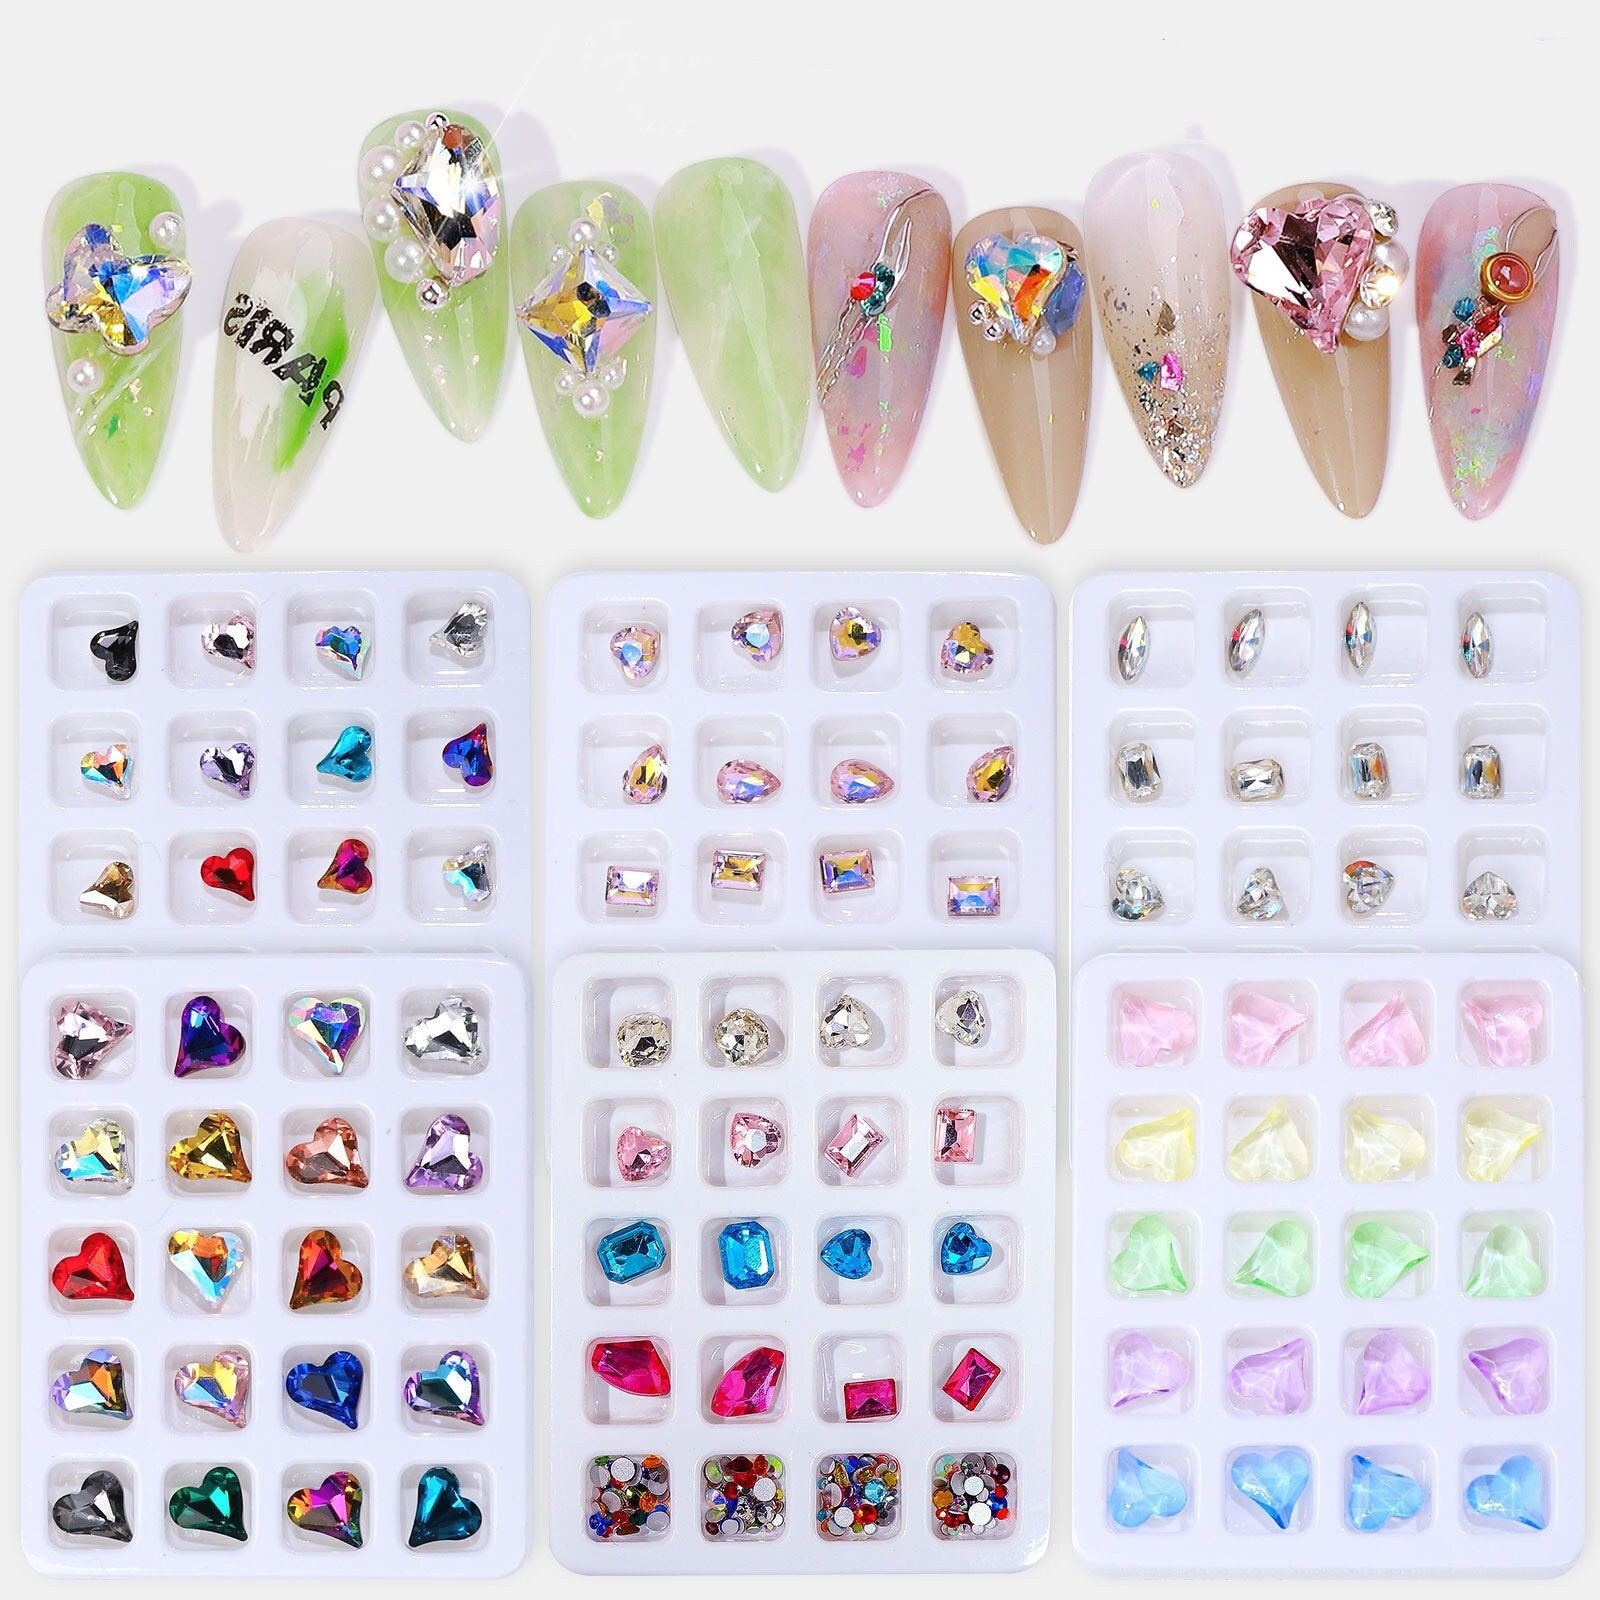 Swarovski SS5 Flatback Rhinestones Mix Colors or Colors AB Colorways  Assorted 144 Pieces Nail Art CHOOSE COLORWAY 